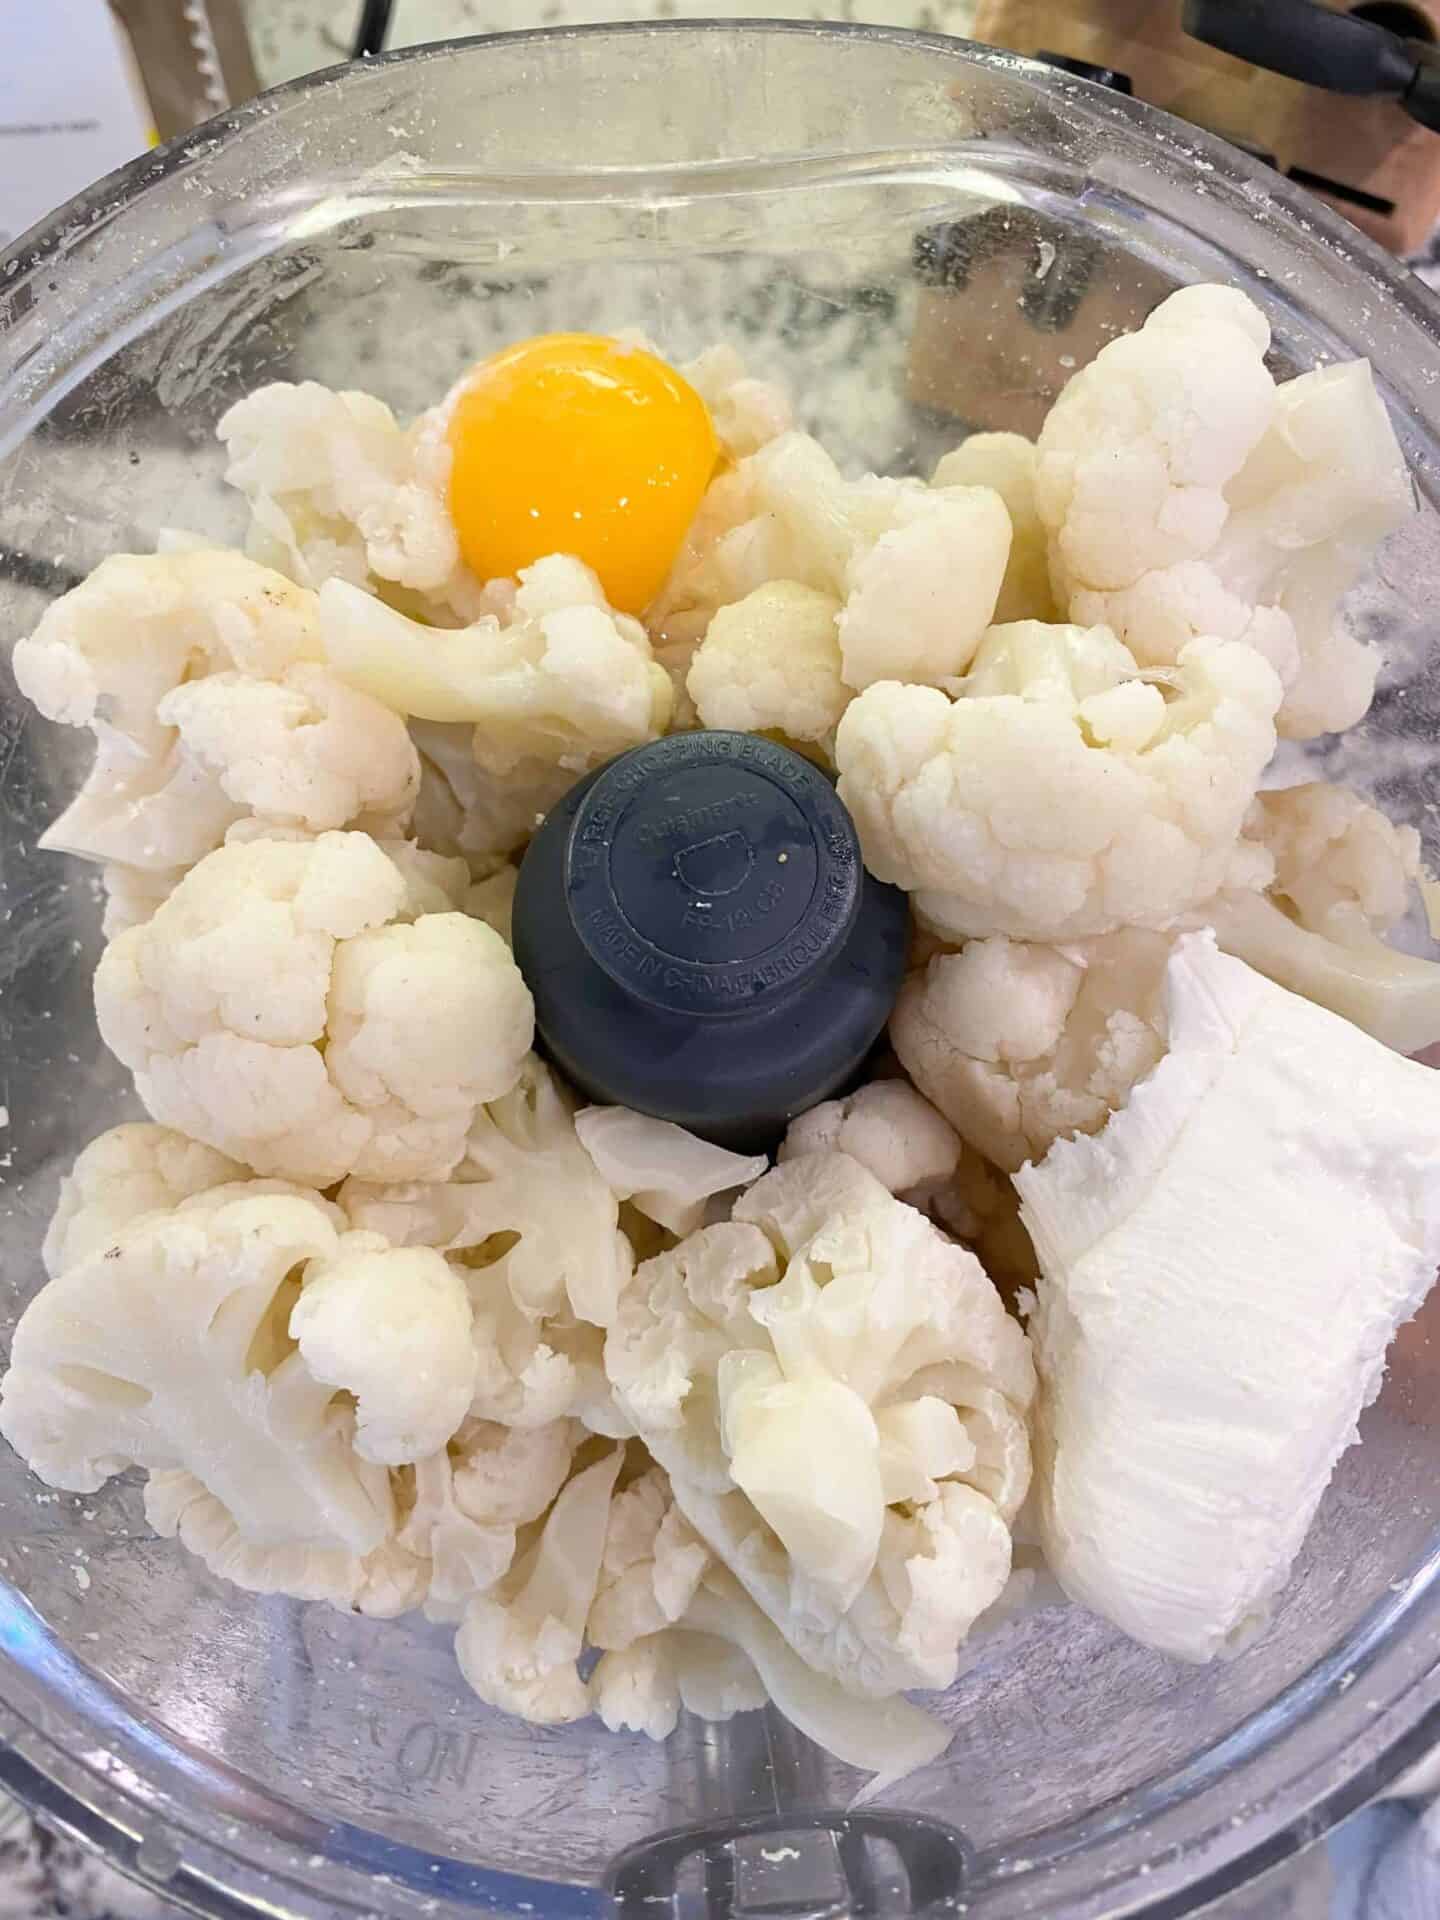 mix-steamed-cauliflower-with-egg-yolk-and-cream-cheese